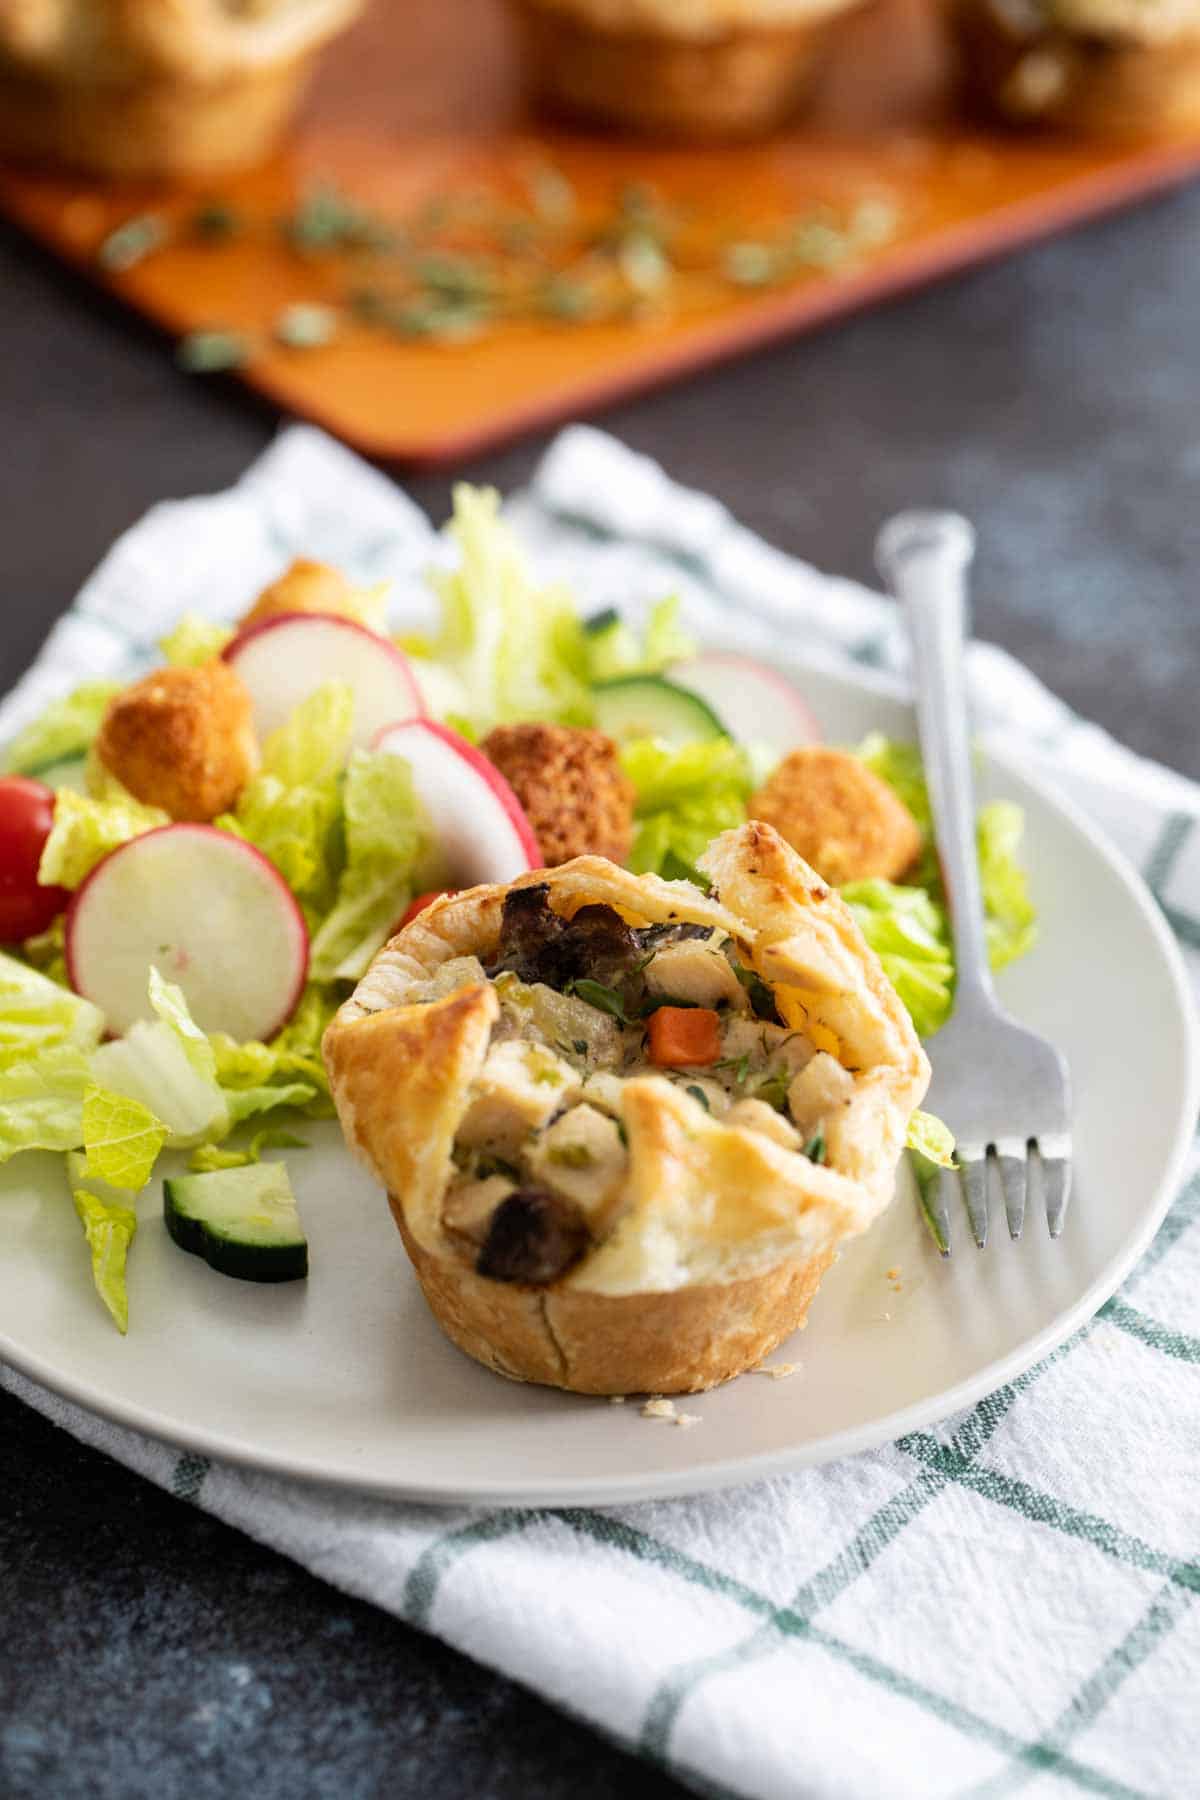 Muffin Tin Chicken Pot Pie served with a green salad.